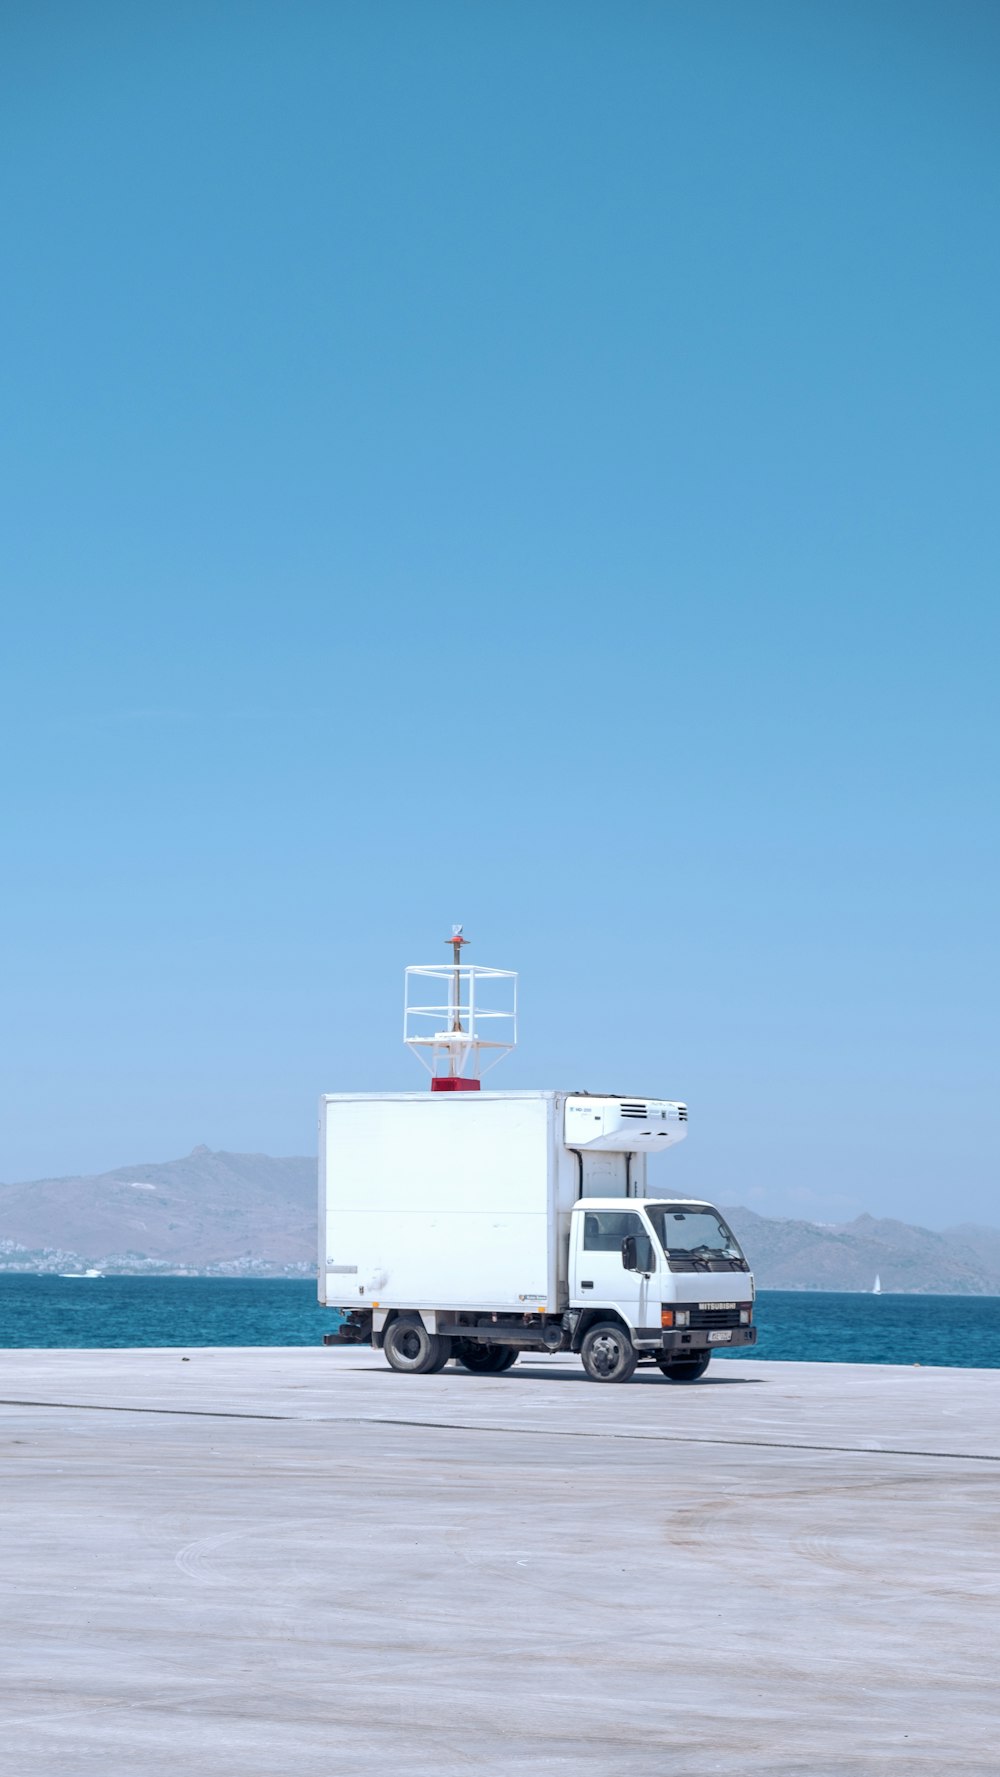 a truck is parked on the beach near the water